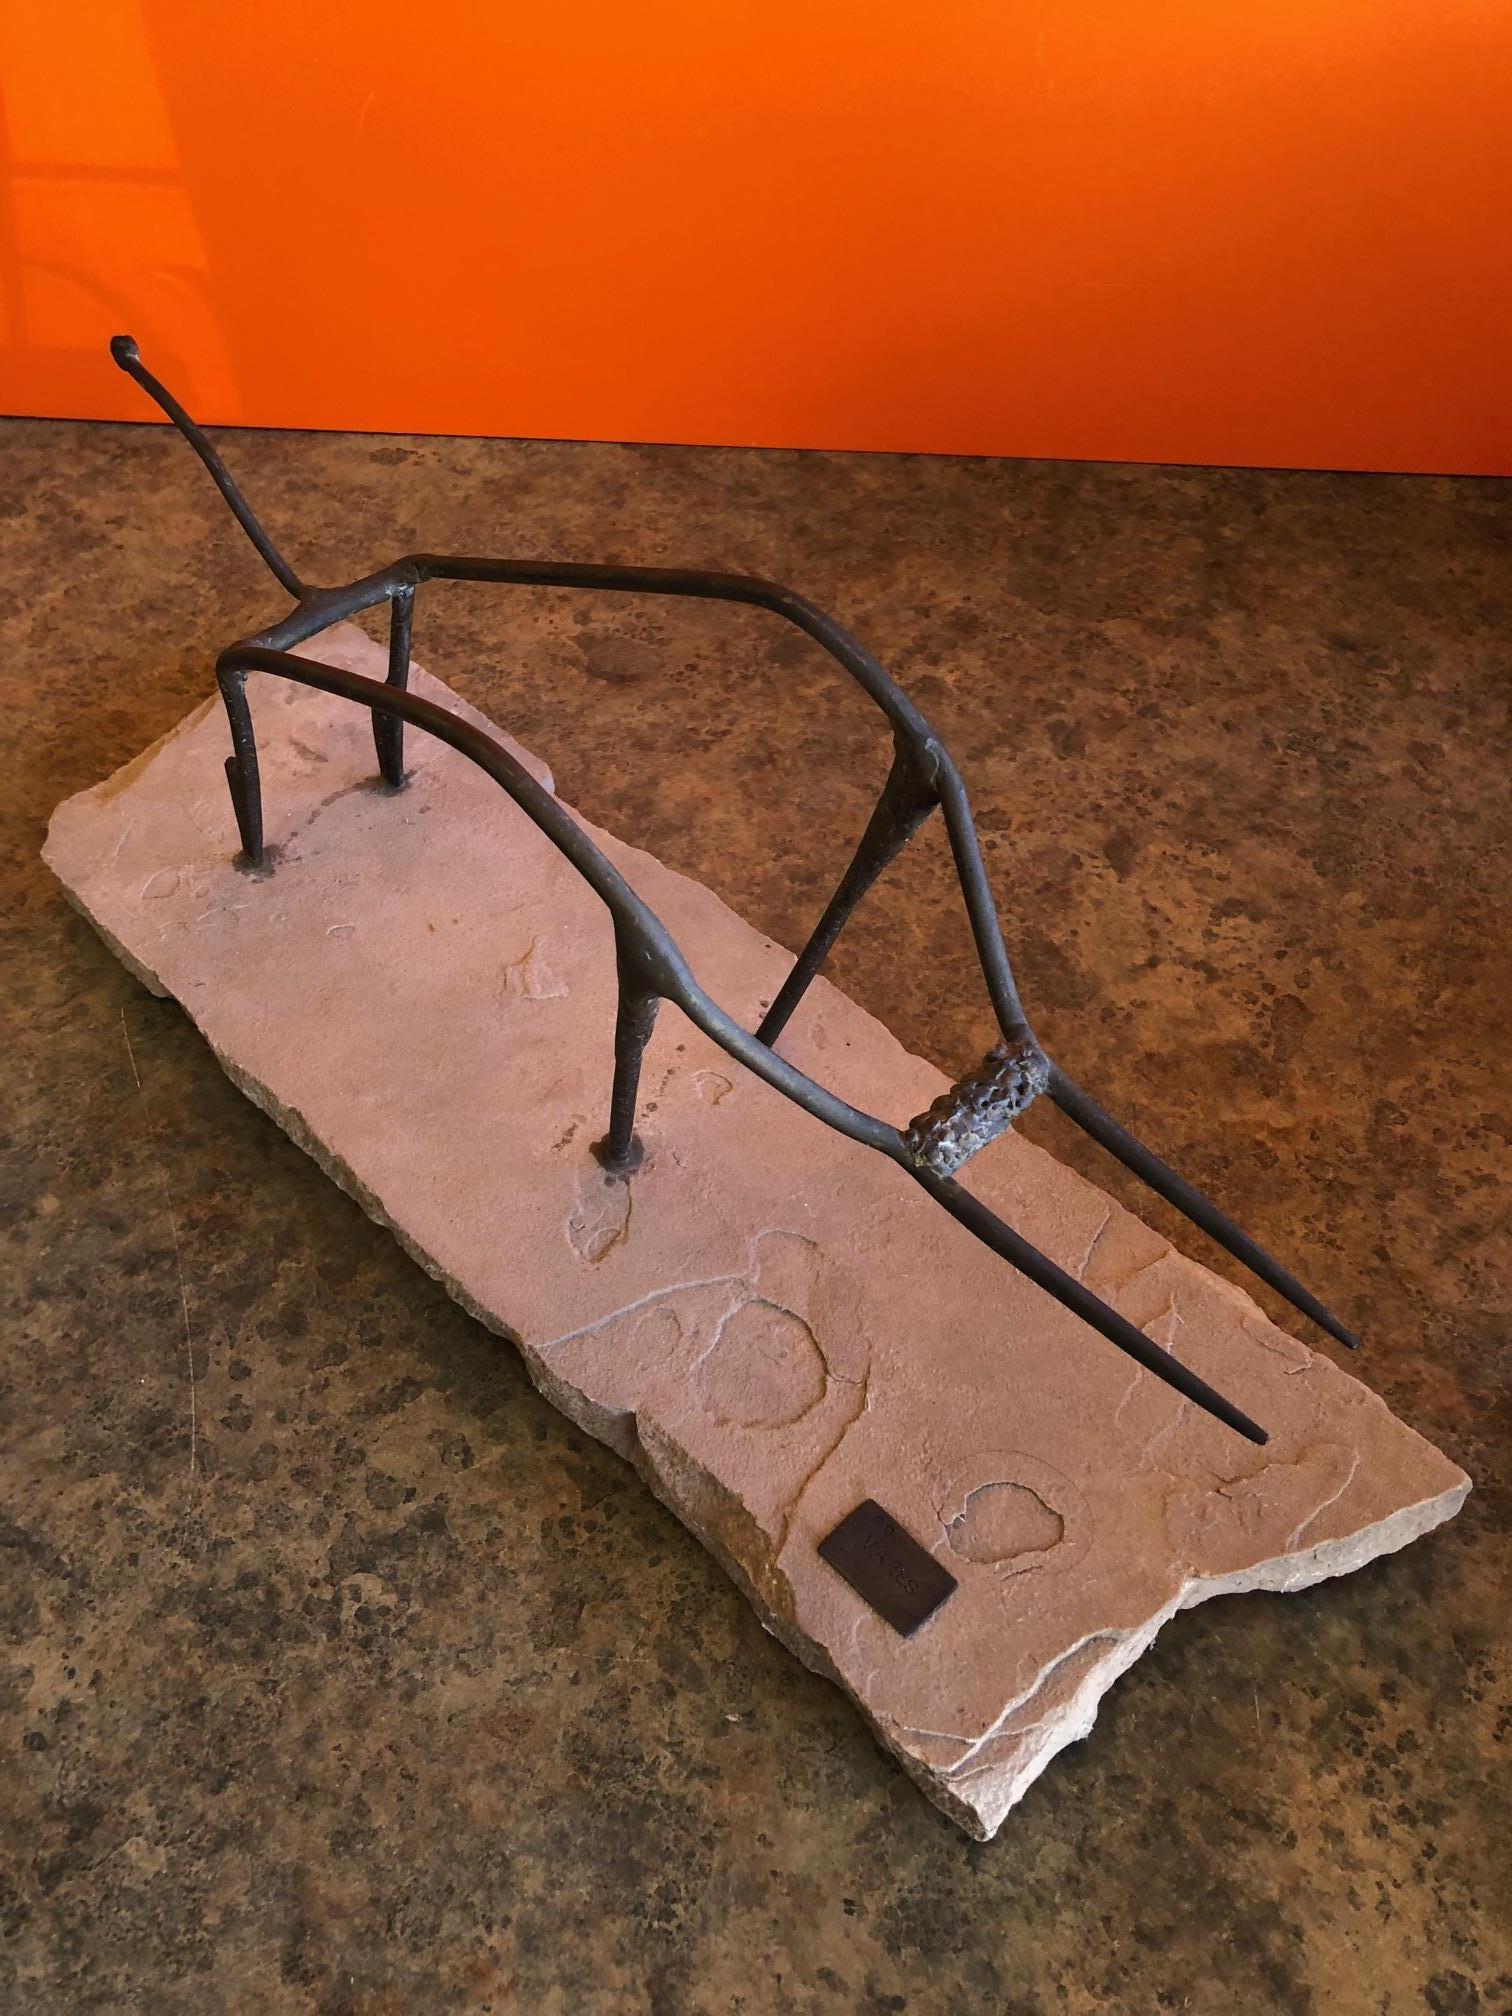 Signed and dated (1969) this raw metal sculpture by San Francisco, California listed artist Ken Vares, entitled 